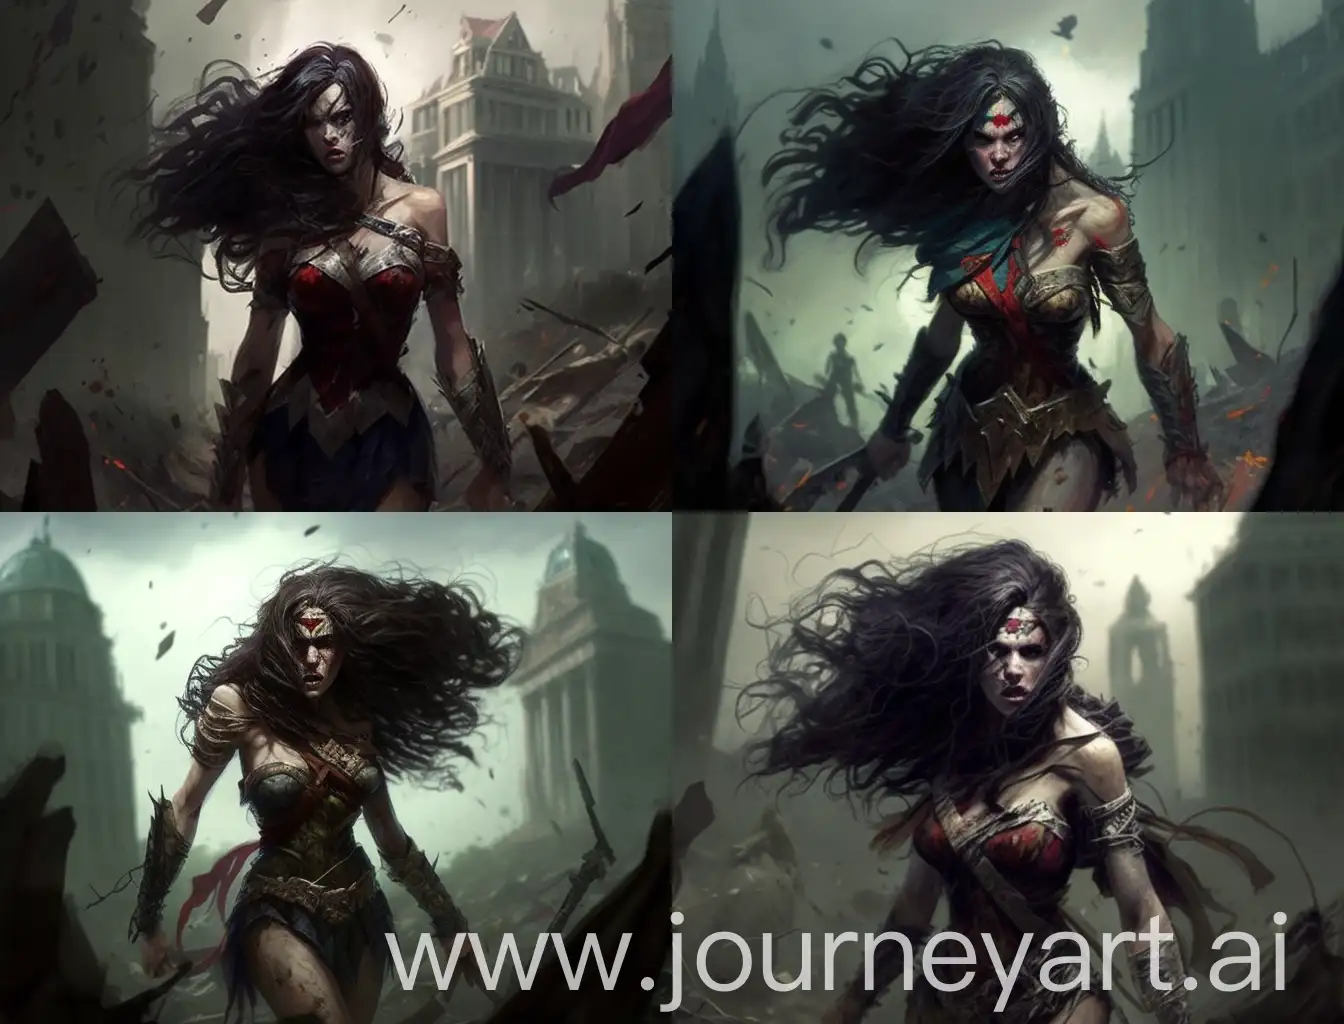 Wonder Woman has turned into a zombie and her hair is hanging forward and she's disheveled and waving in the wind, and her clothes are dirty and torn and she's half-witted and weak trying to walk around the ruined city. There are some zombies around them.